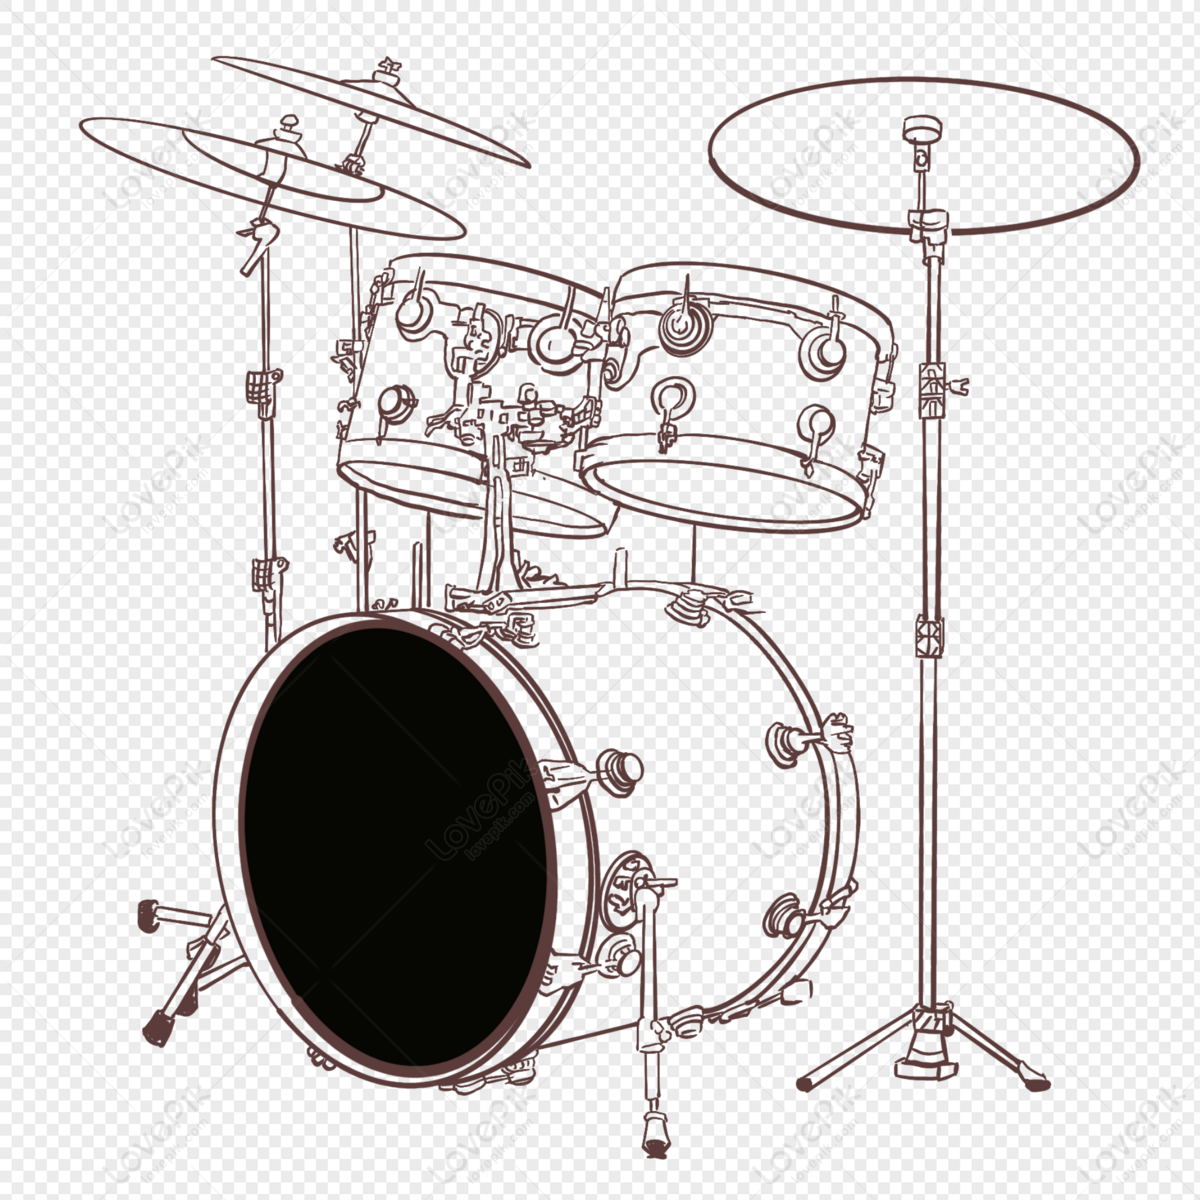 Stock Realistic Illustration Of A Drum Kit Eps With Snare Drum Bass In  Cartoon And Sketch Style Royalty Free SVG, Cliparts, Vectors, and Stock  Illustration. Image 143068602.